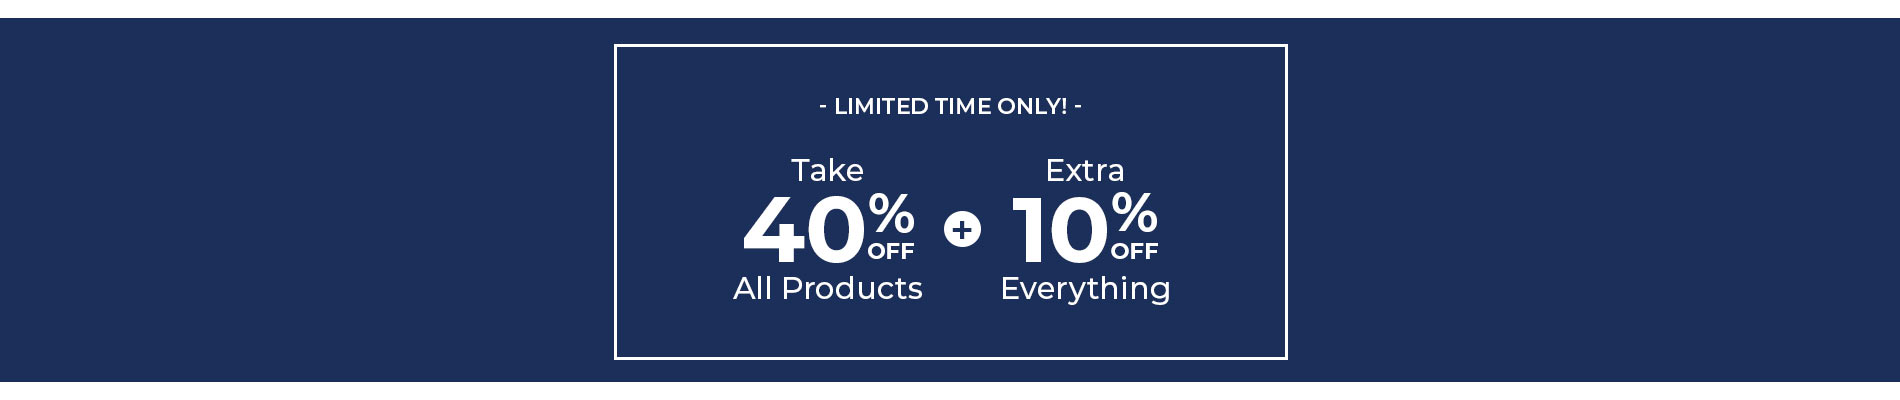 Take 40% Off All Products + Extra 10% Off Everything!